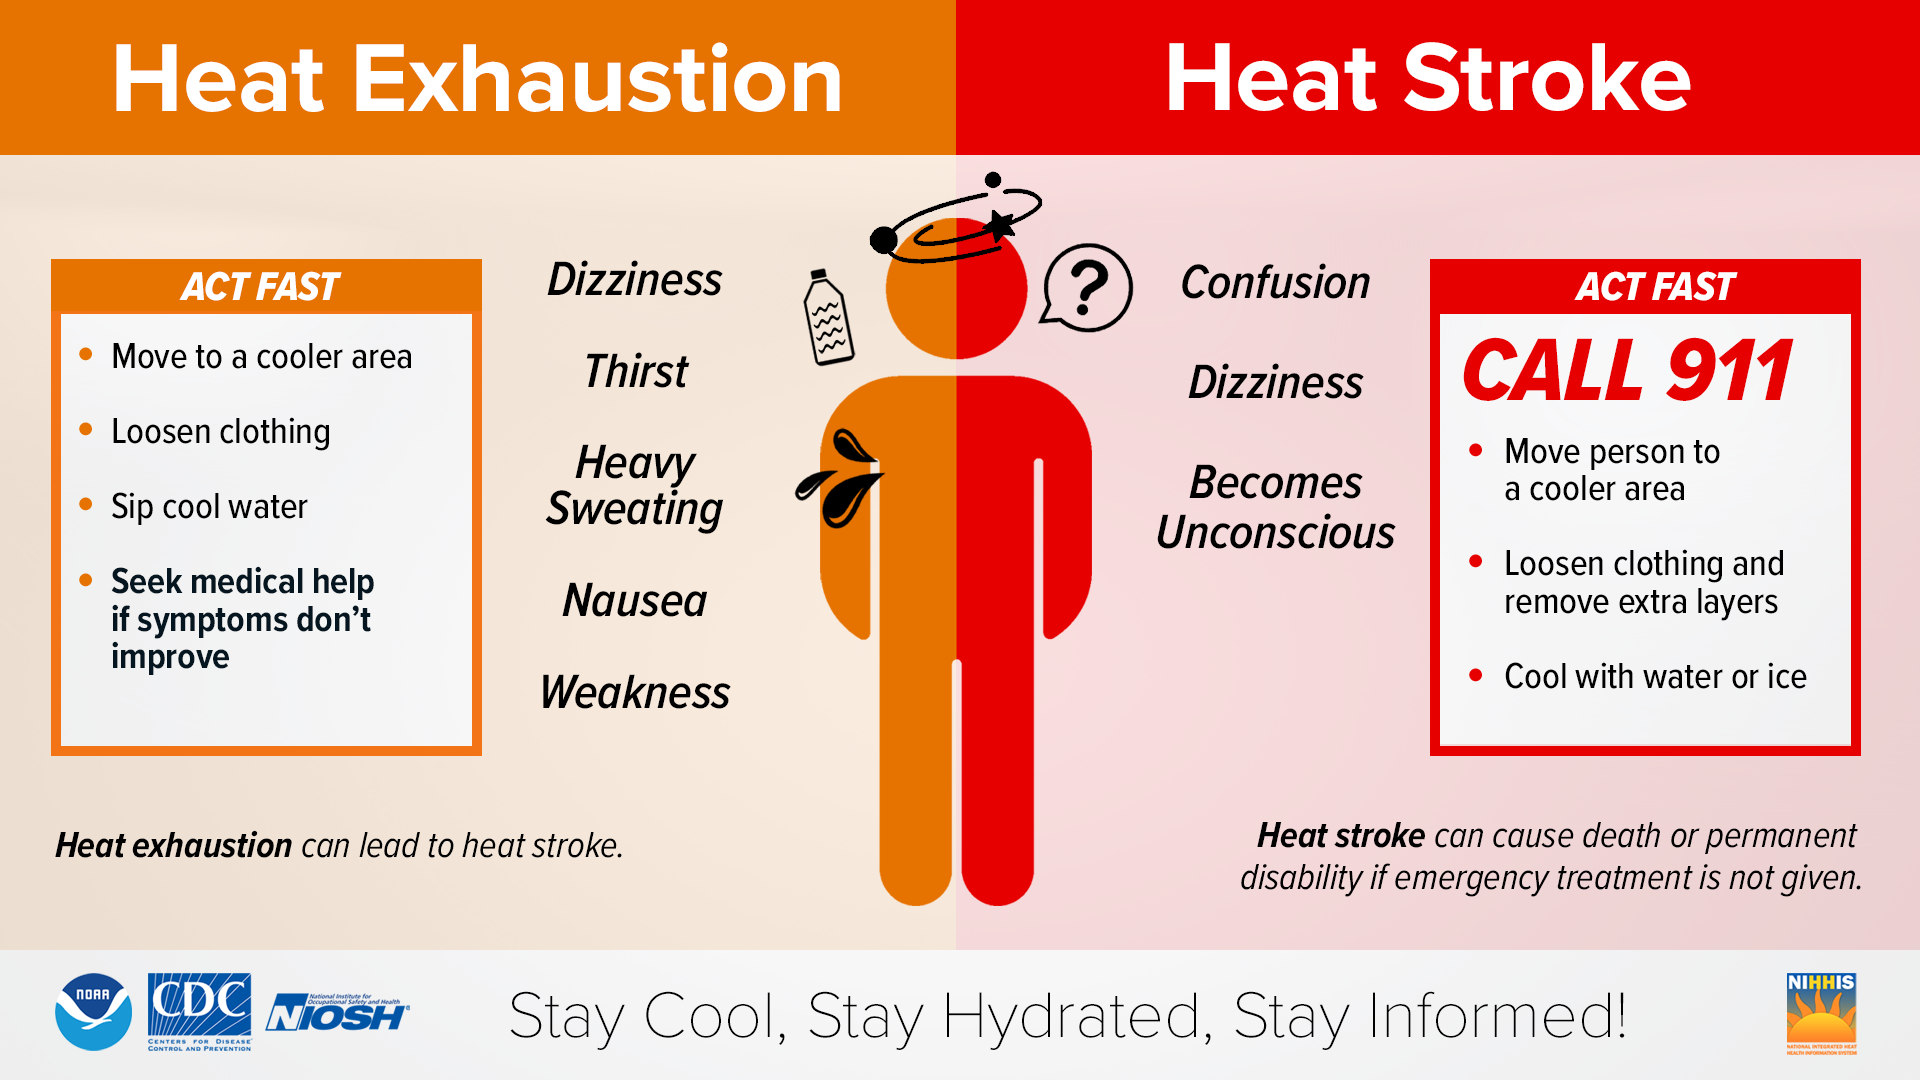 Heat Exhaustion vs Heat Stroke. Symptoms of heat exhaustion include dizziness, thirst, heavy sweating, nausea, and weakness. Act fast by moving to a cooler area, loosening clothing, sipping cool water. Seek medical help if symptoms don't improve. Heat exhaustion can lead to heat stroke. Symptoms of heat stroke include confusion, dizziness, and becoming unconscious. Act fast by calling 911, moving the person to a cooler area, loosening clothing and removing extra layers, and cooling with water or ice. Heat stroke can cause death or permanent disability if emergency treatment is not given.